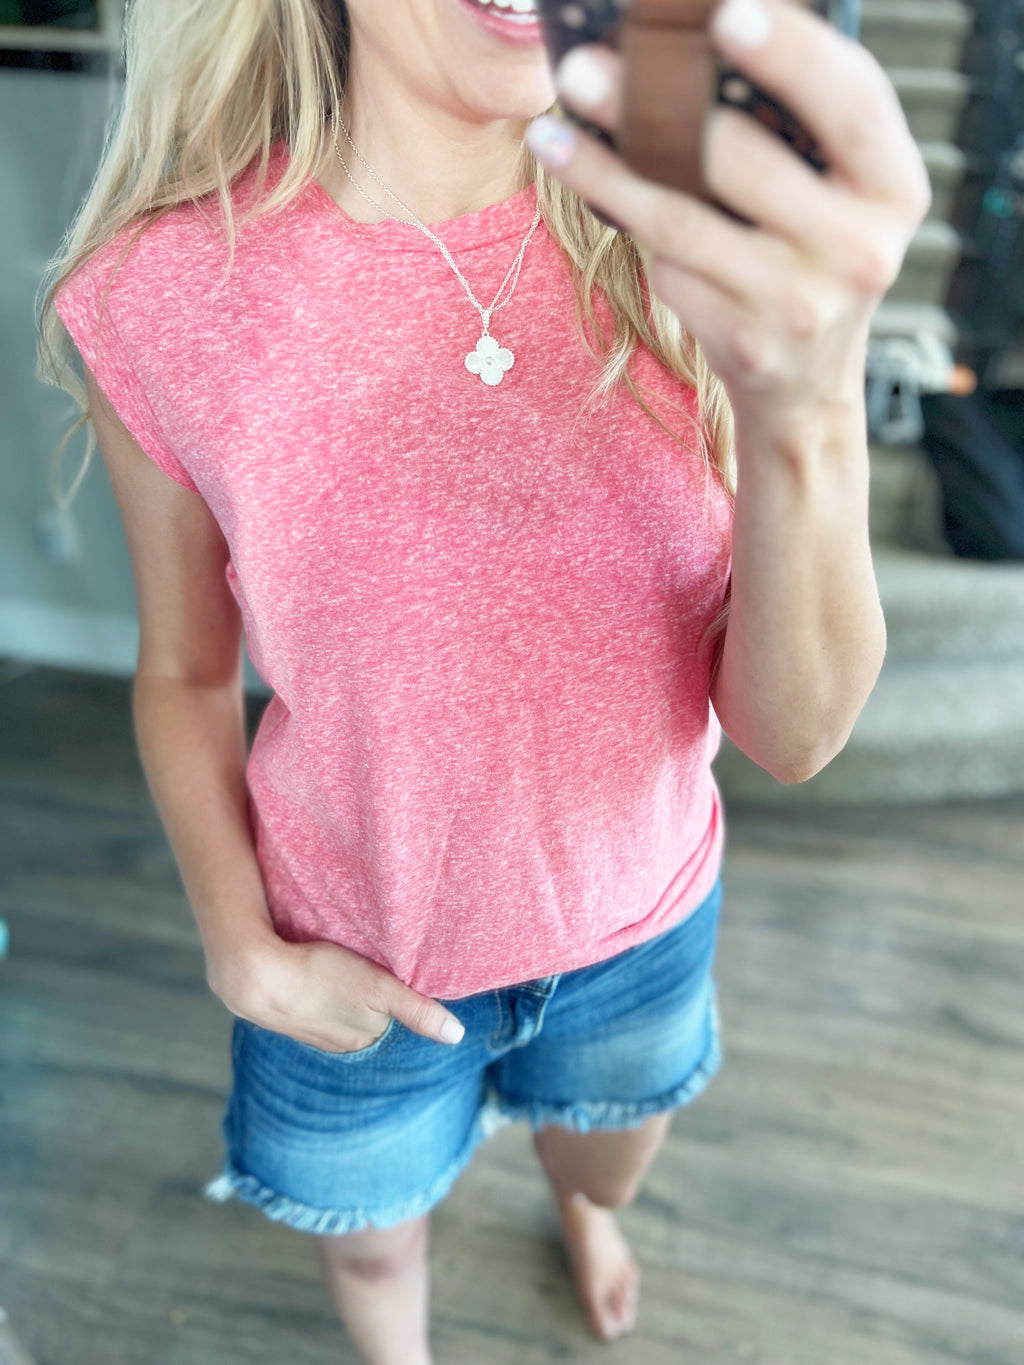 Complete Me Crew Neck Tank in Hot Coral